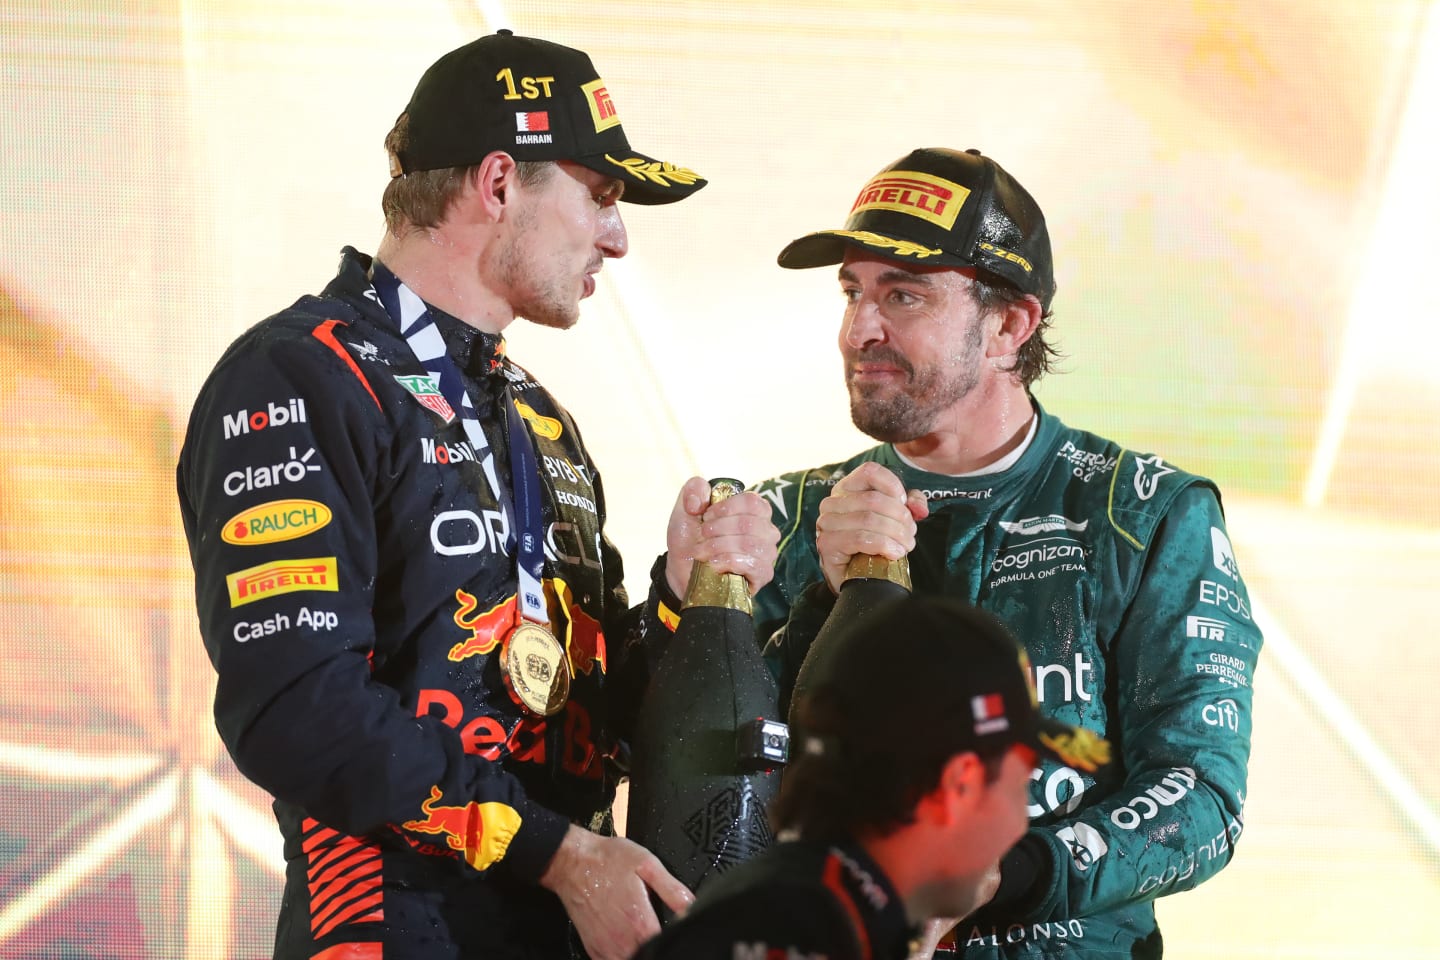 BAHRAIN, BAHRAIN - MARCH 05: Race winner Max Verstappen of the Netherlands and Oracle Red Bull Racing and Third placed Fernando Alonso of Spain and Aston Martin F1 Team celebrate on the podium during the F1 Grand Prix of Bahrain at Bahrain International Circuit on March 05, 2023 in Bahrain, Bahrain. (Photo by Peter Fox/Getty Images)